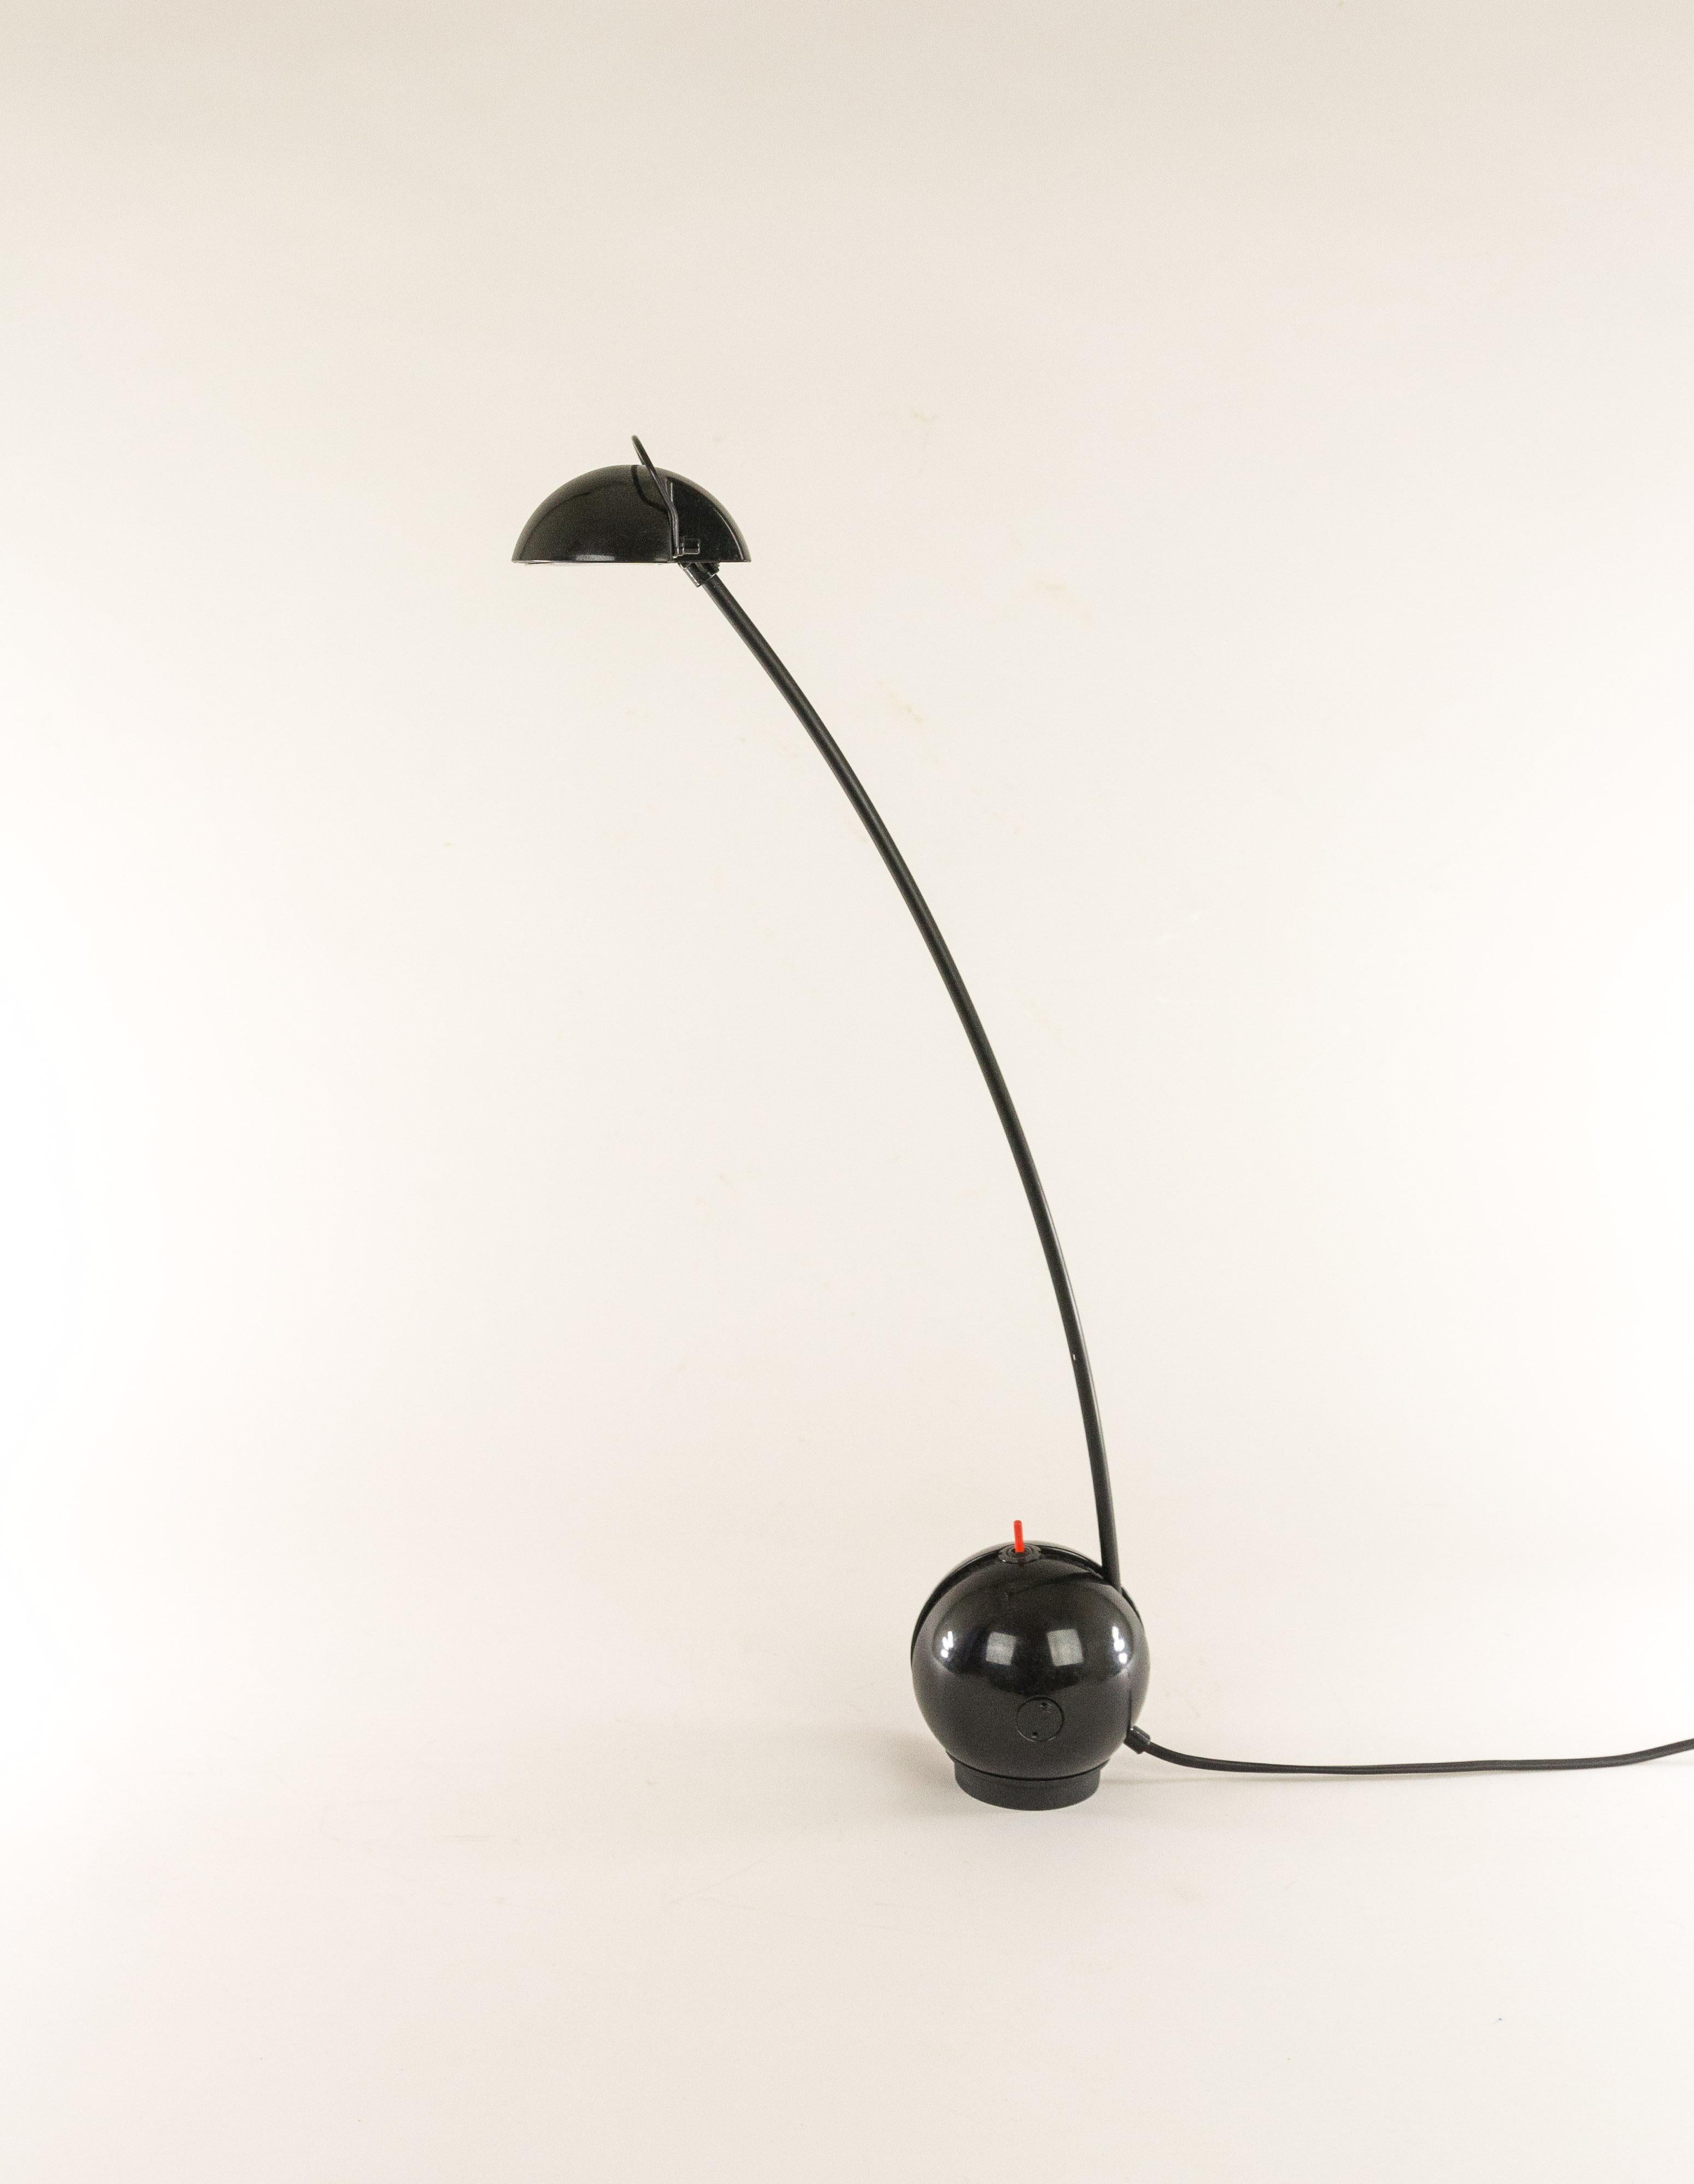 Pair of black Alina table lamps produced by Italian manufacturer Valenti. Playful lamp with ingenious system that allows for adjustment in different positions.

The spherical base contains the transformer and rests on a separate holder that is